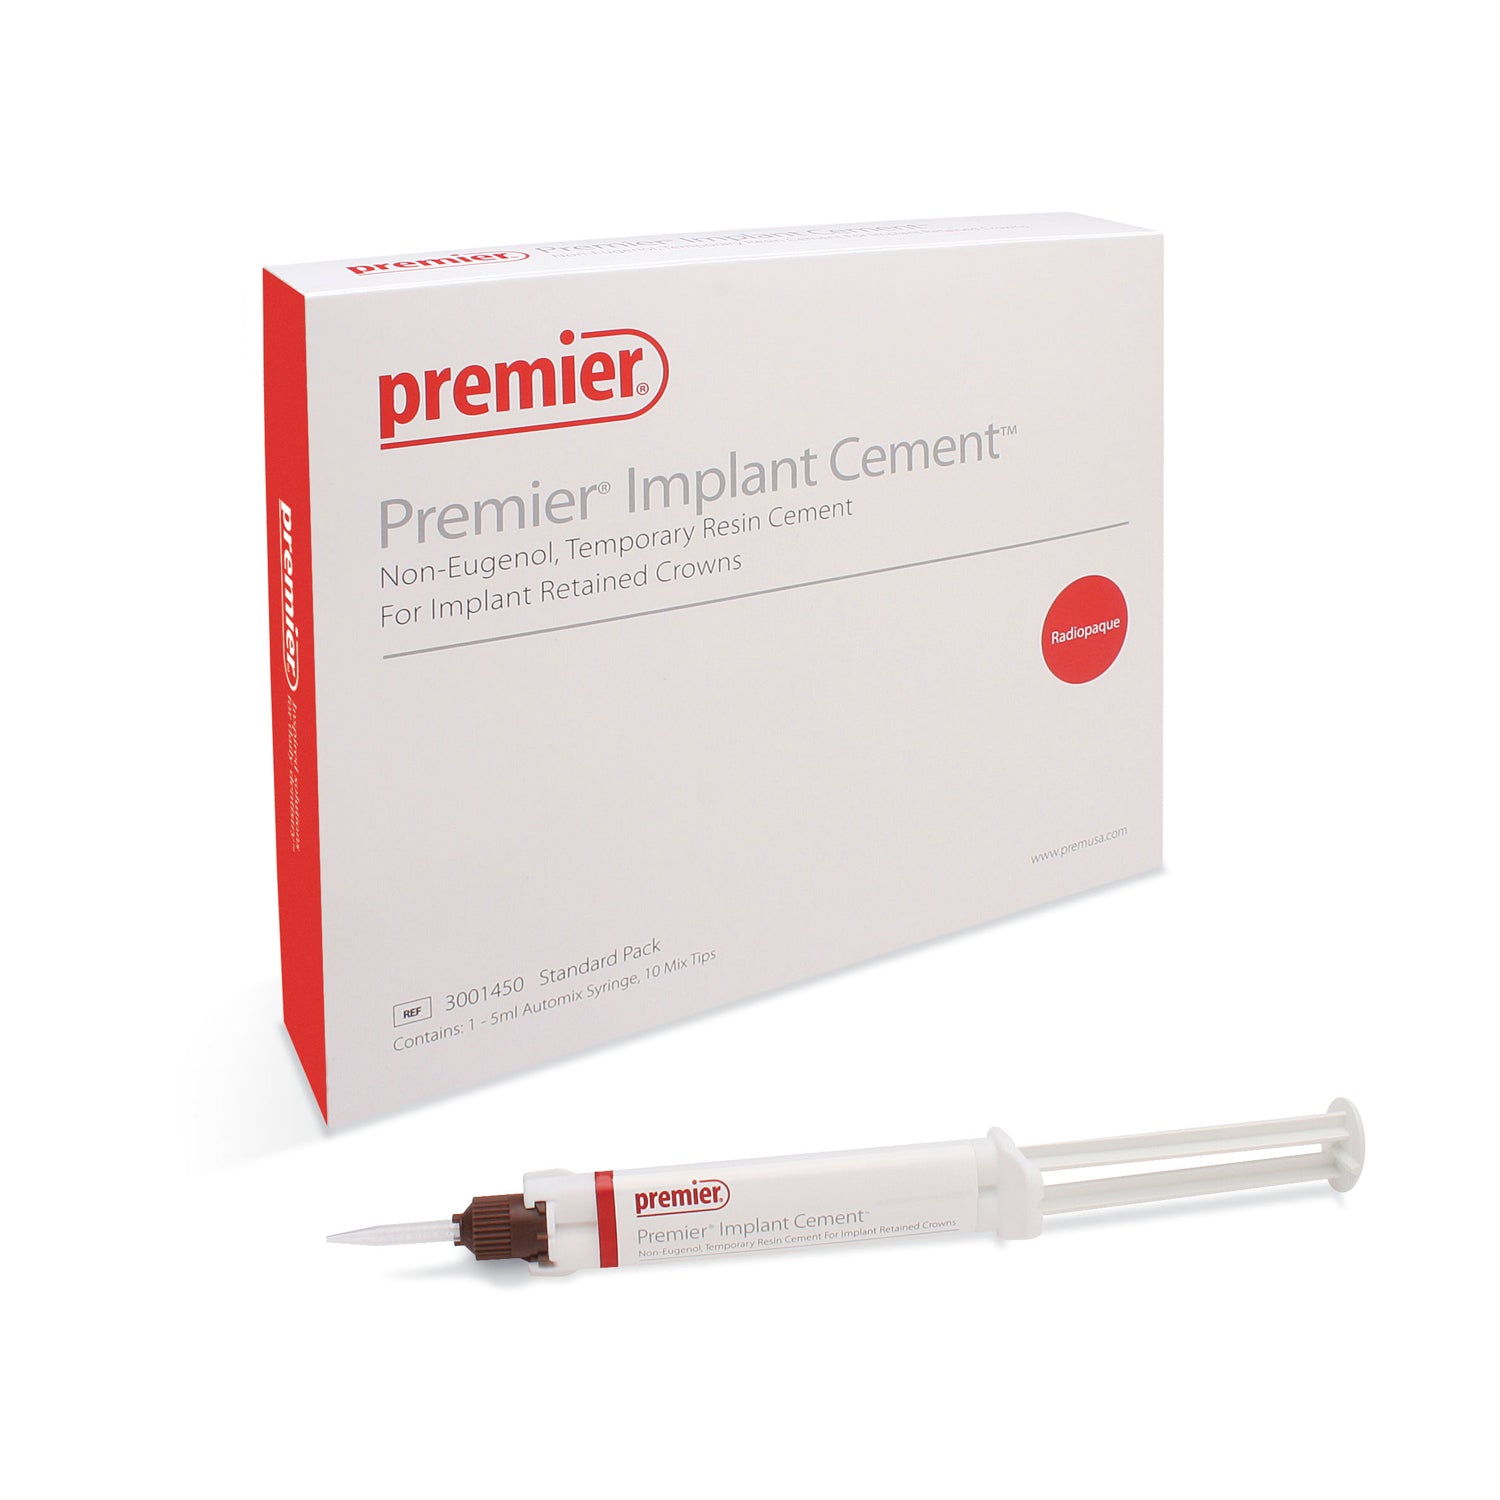 Premier Implant Cement, Non-Eugenol, Temporary Resin Cement for Implant Retained Crowns, 5mL Automix Syringe